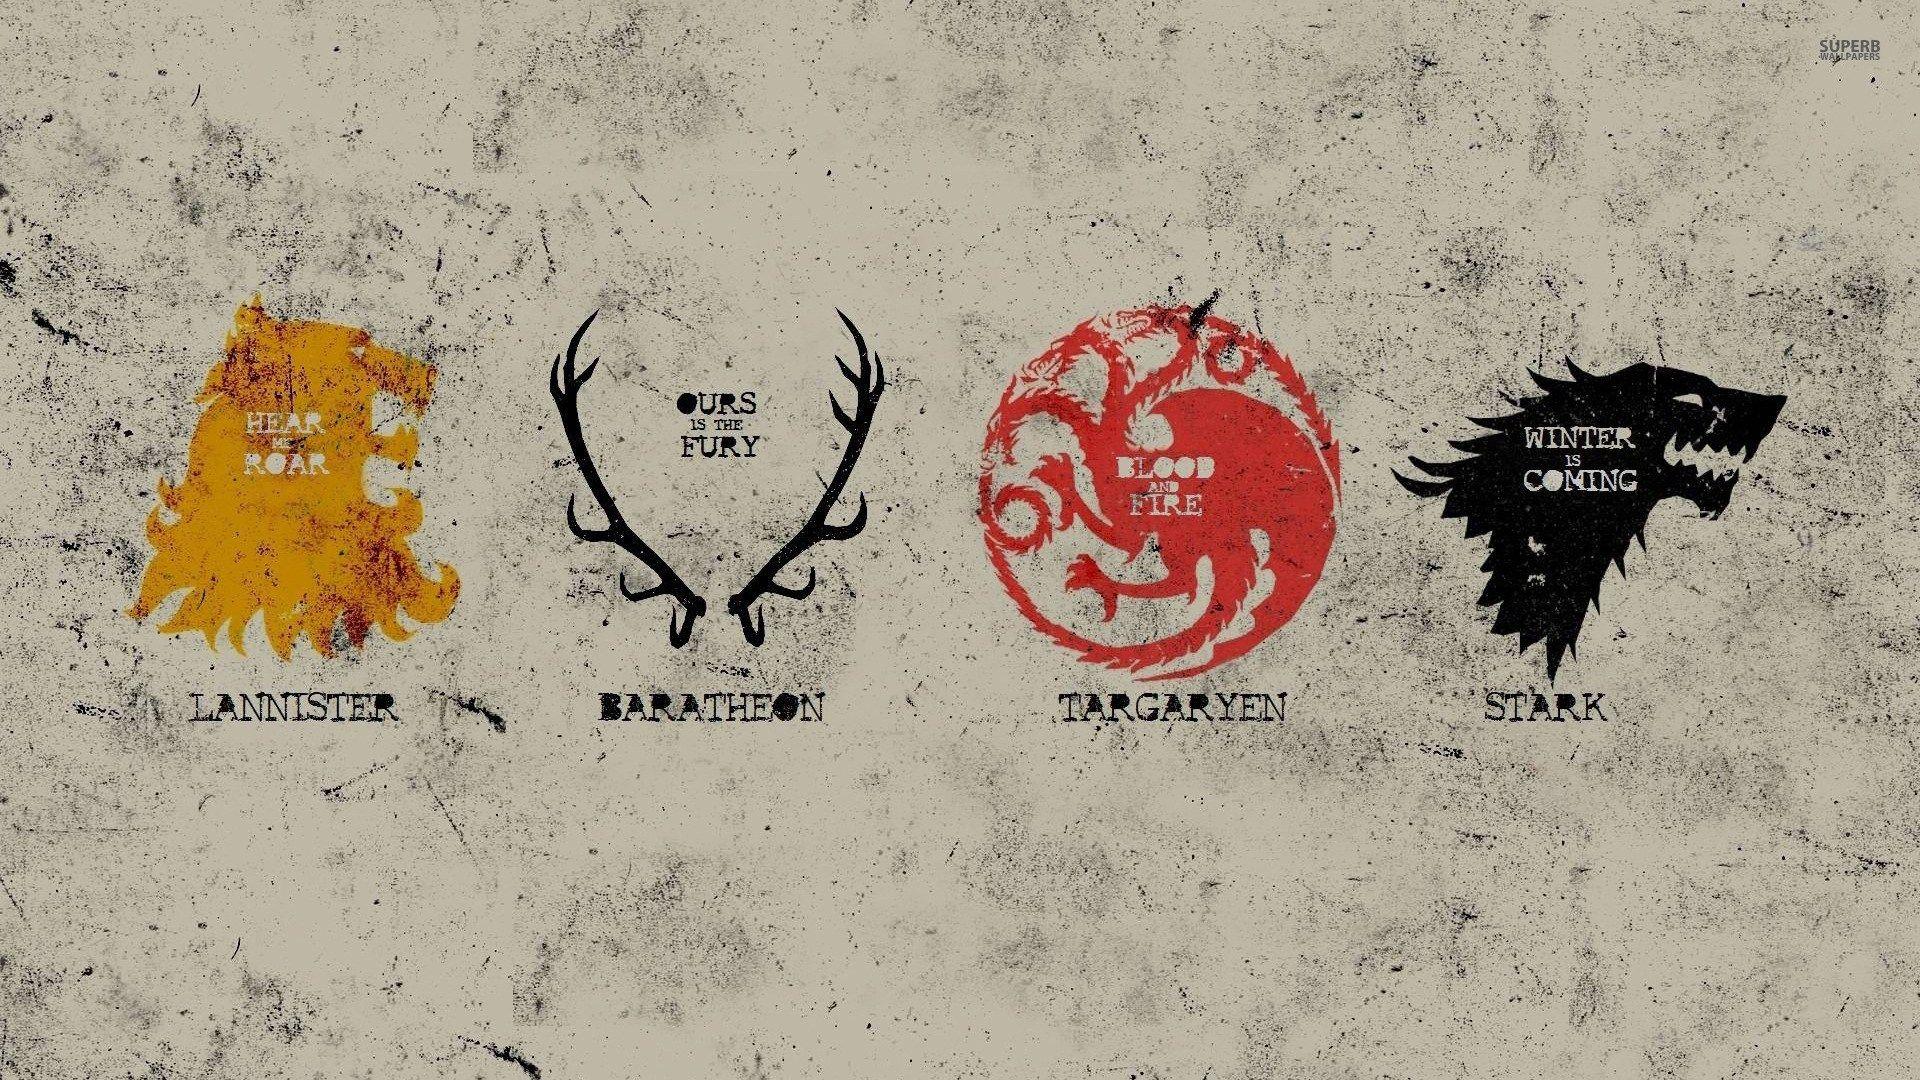 HD Game of Thrones wallpaper to support your favorite house